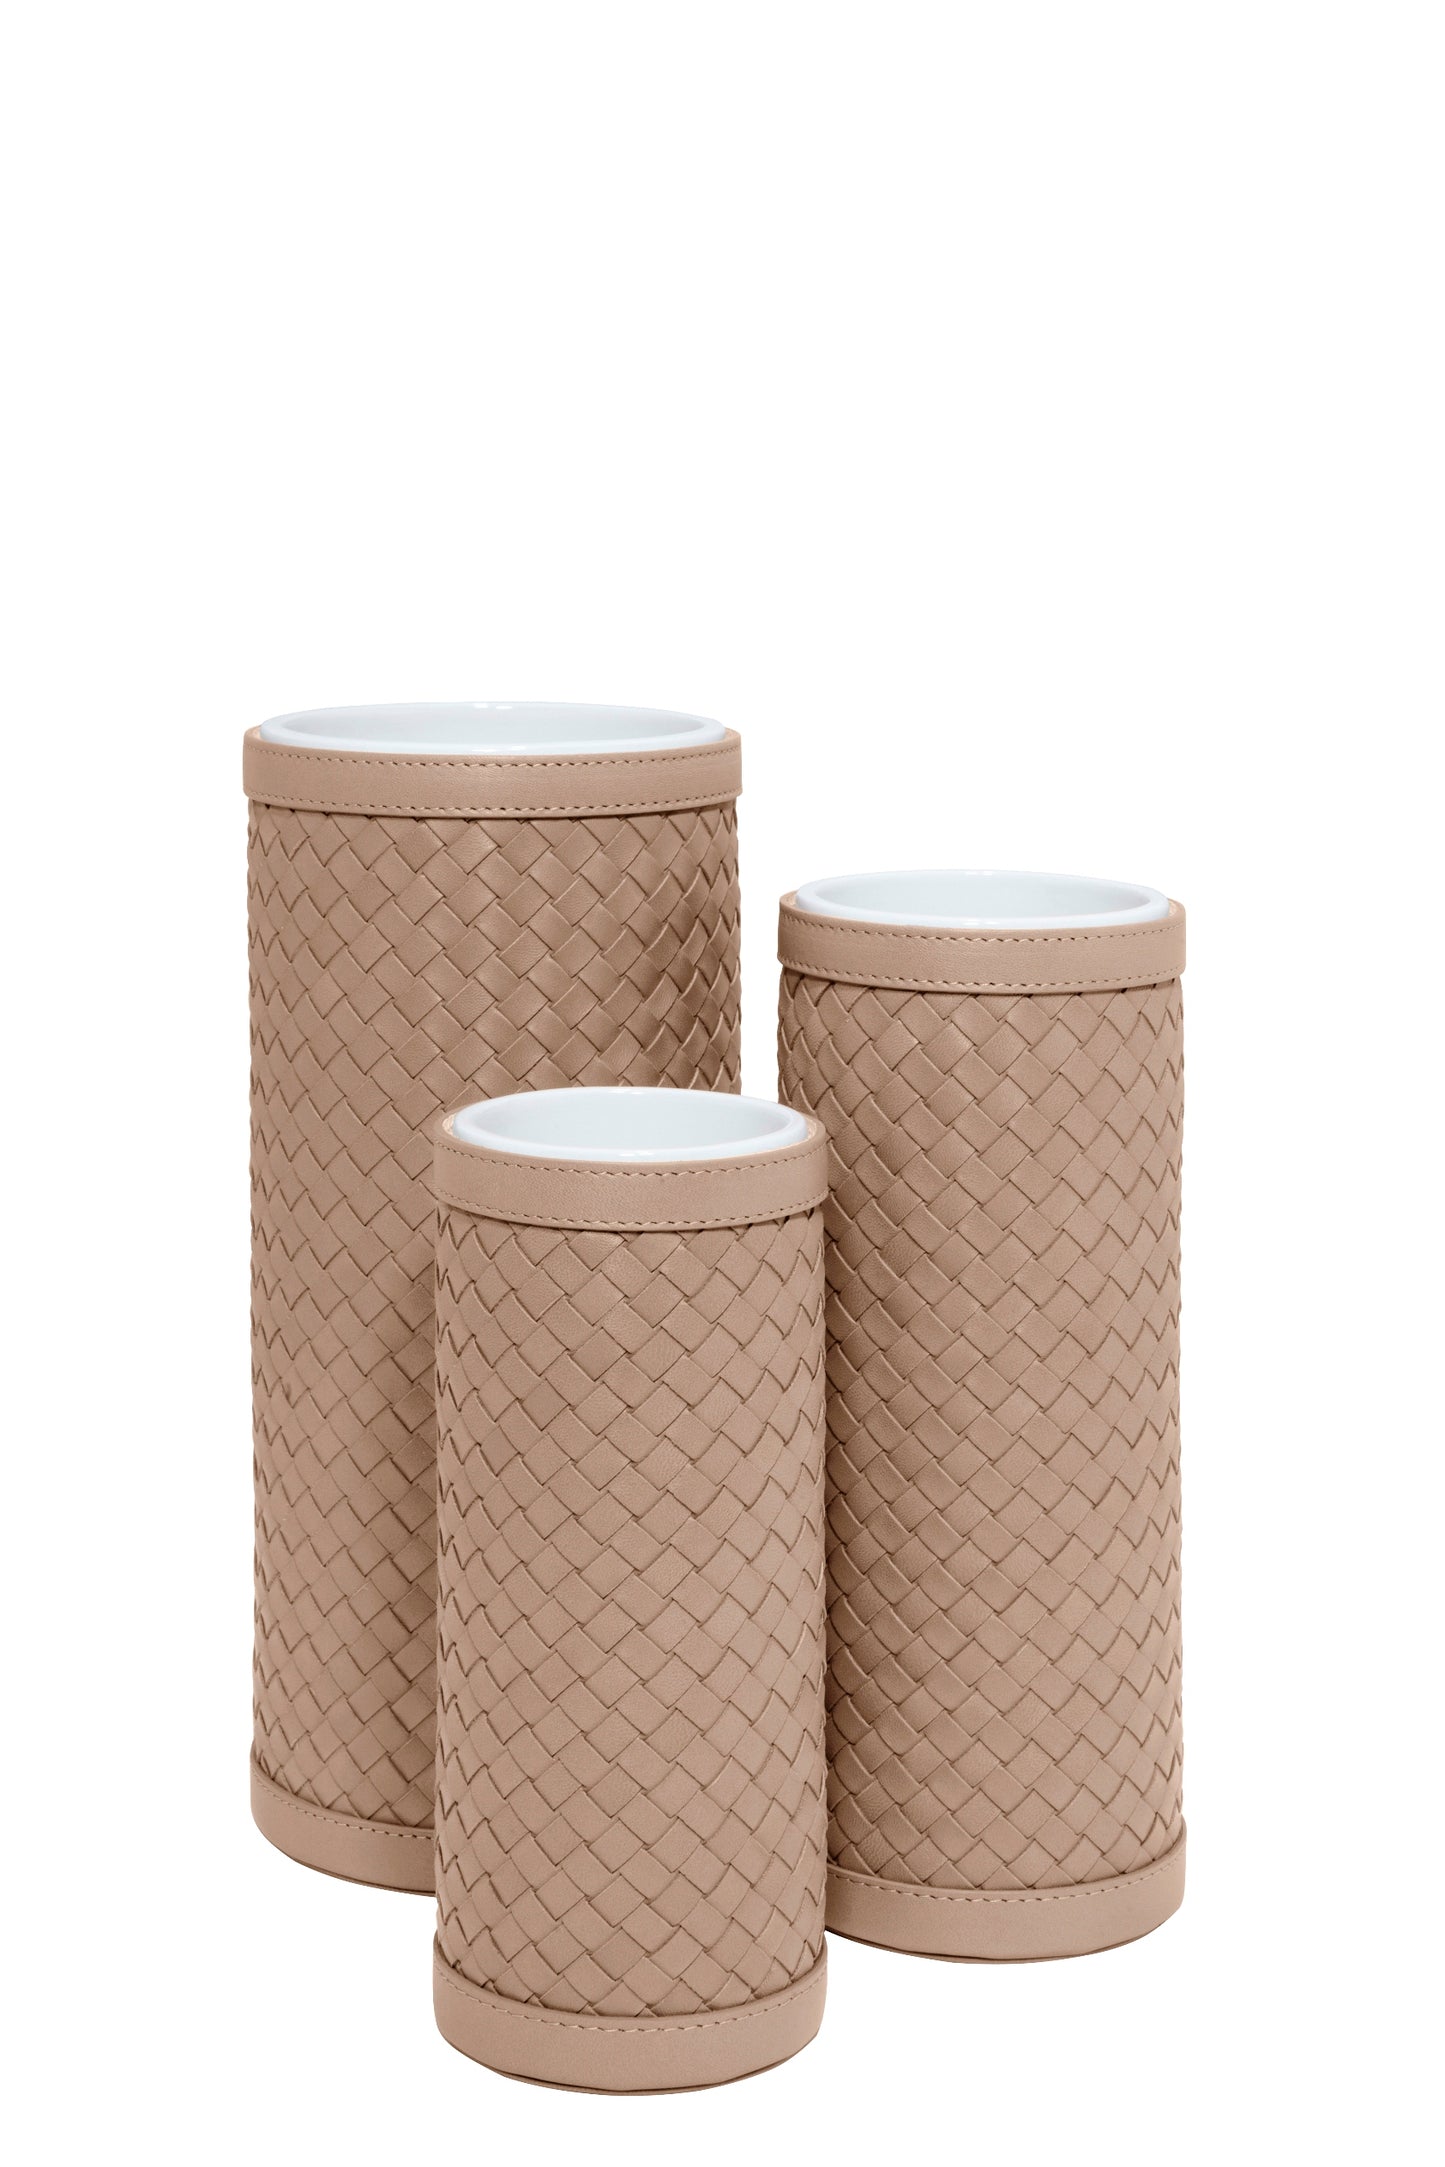 Riviere Ester Ceramic Vase With Handwoven Leather Cover | Exquisite Ceramic Vase Design | Handwoven Leather Cover for Added Elegance | Elevate Your Home Decor with Luxury Accessories from Riviere | Available at 2Jour Concierge, #1 luxury high-end gift & lifestyle shop